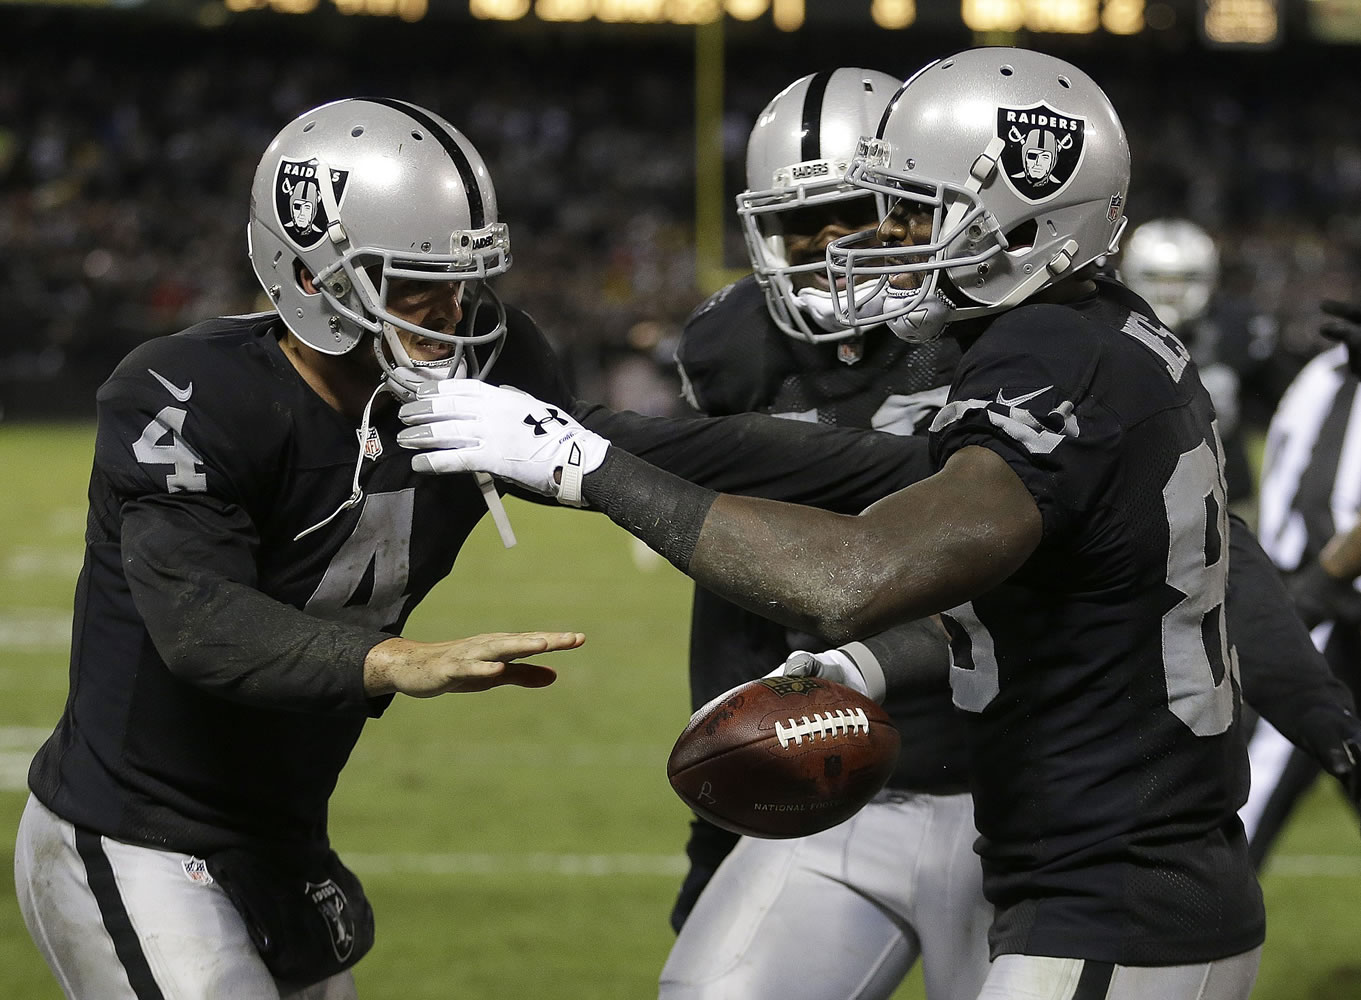 Oakland Raiders quarterback Derek Carr (4) and wide receiver James Jones, right, celebrate after connecting on a 9-yard touchdown pass against the Kansas City Chiefs during the fourth quarter in Oakland, Calif., Thursday, Nov. 20, 2014.